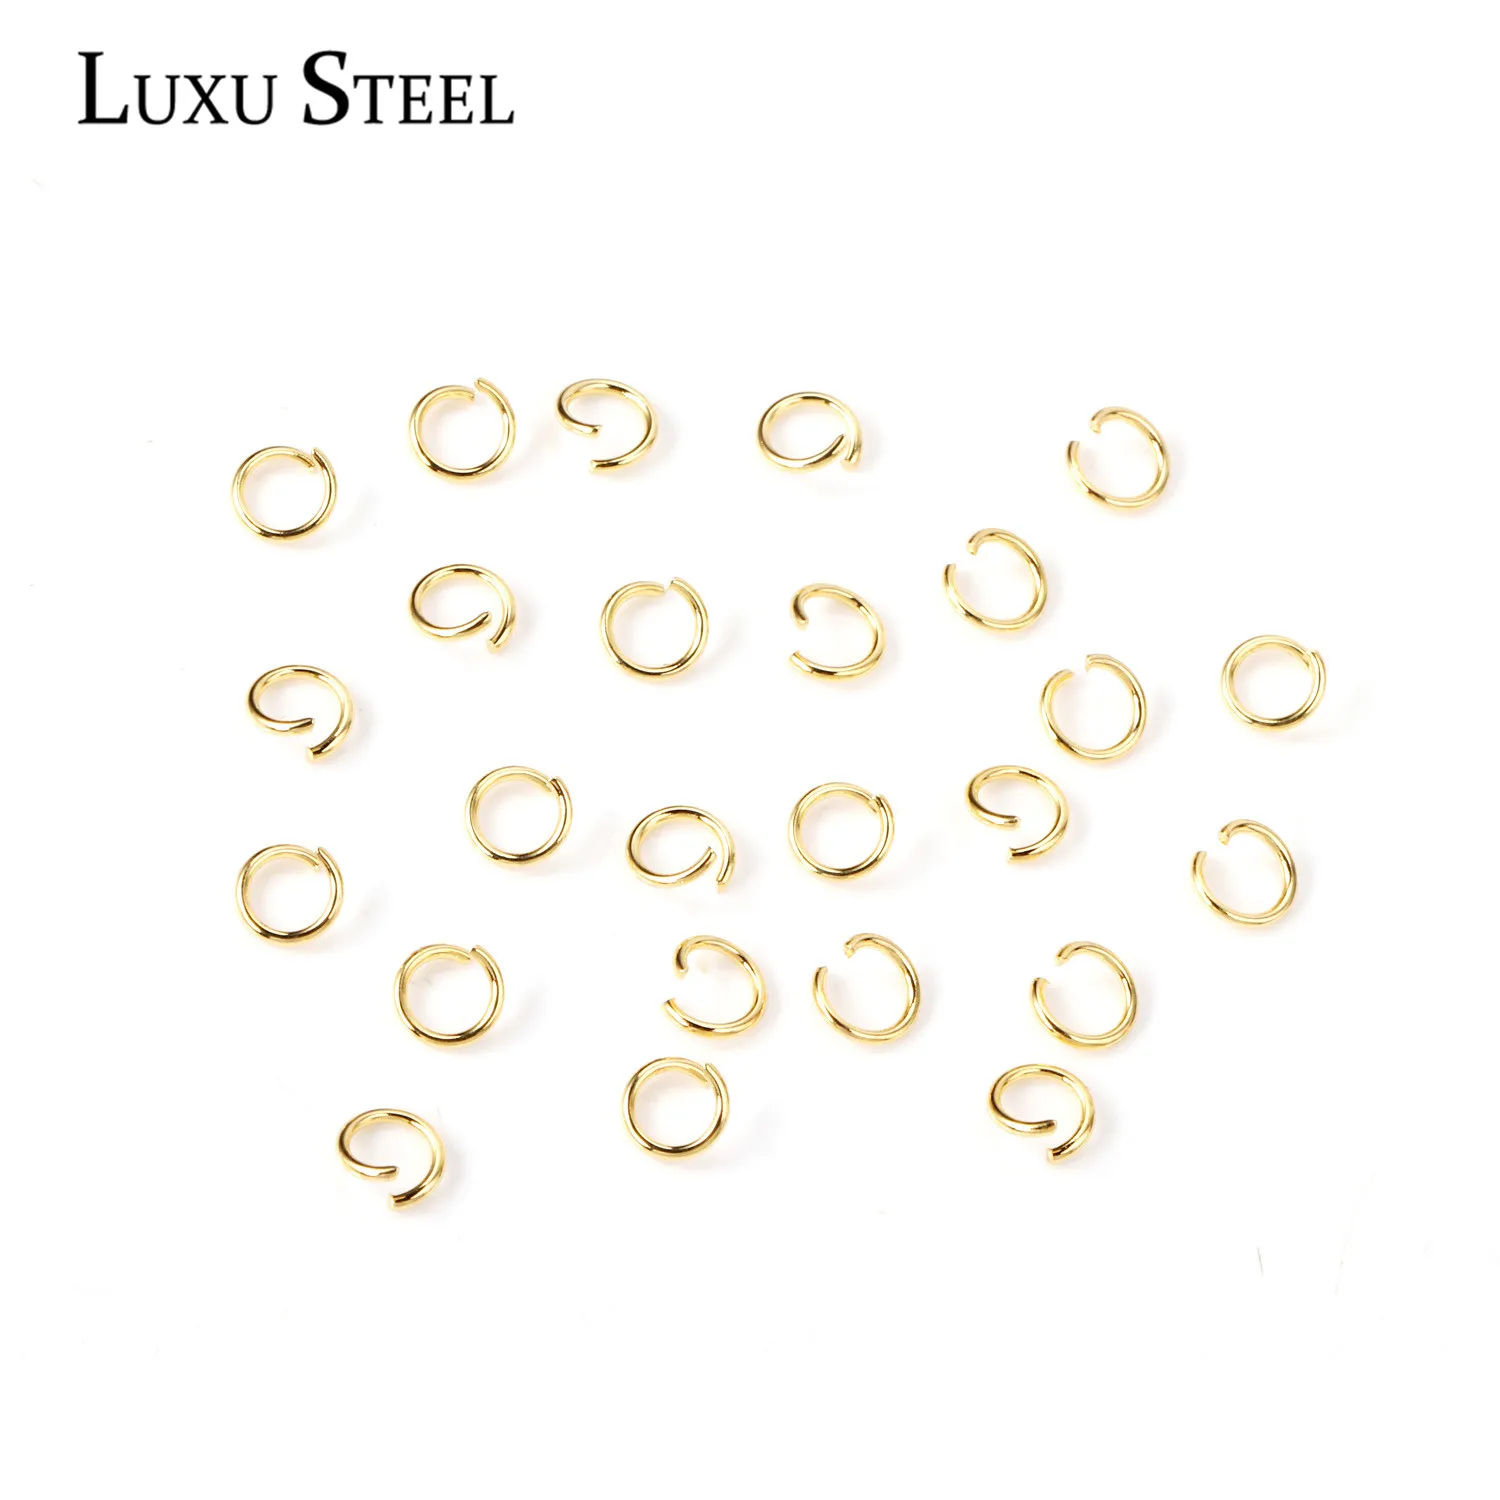 LUXUSTEEL 1000pcs/lots Stainless Steel Jump Rings DIY Jewelry Making Necklace Bracelet Findings Connector Open Jump Ring